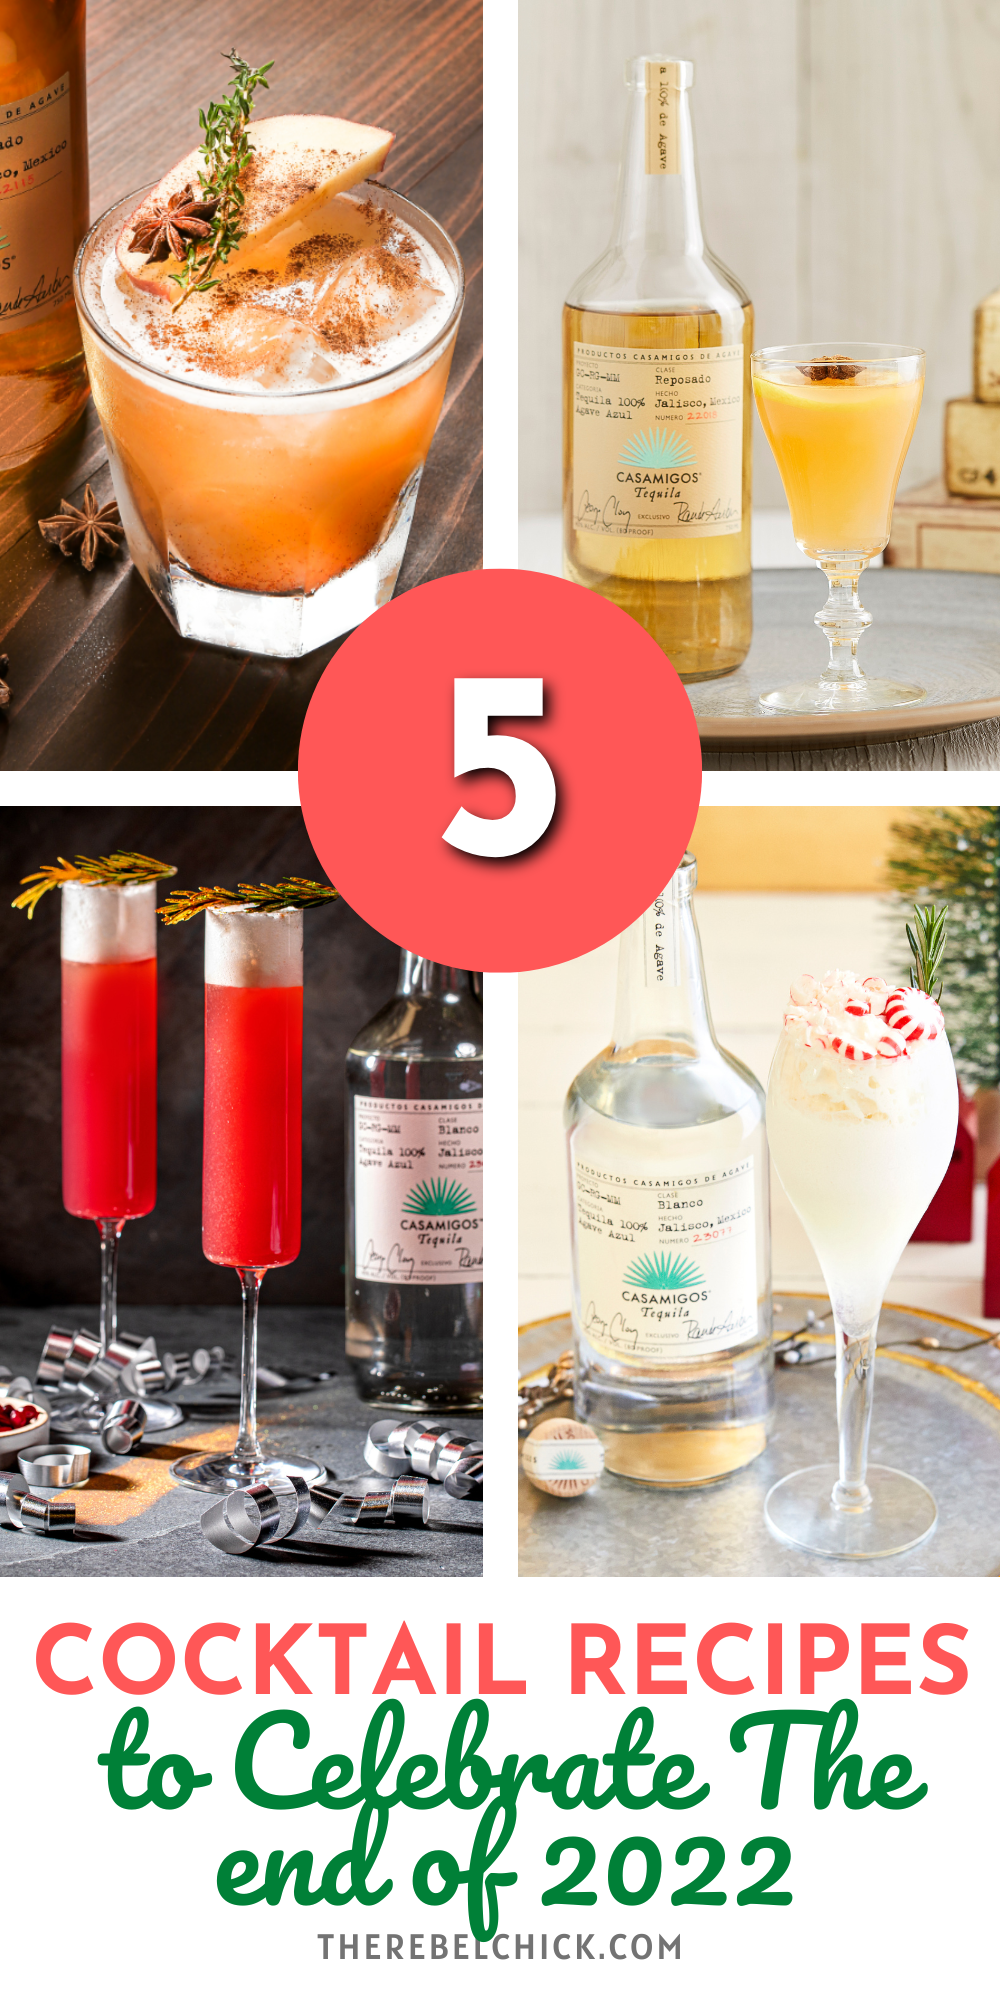 5 Unique Cocktail Recipes to Celebrate The end of 2022